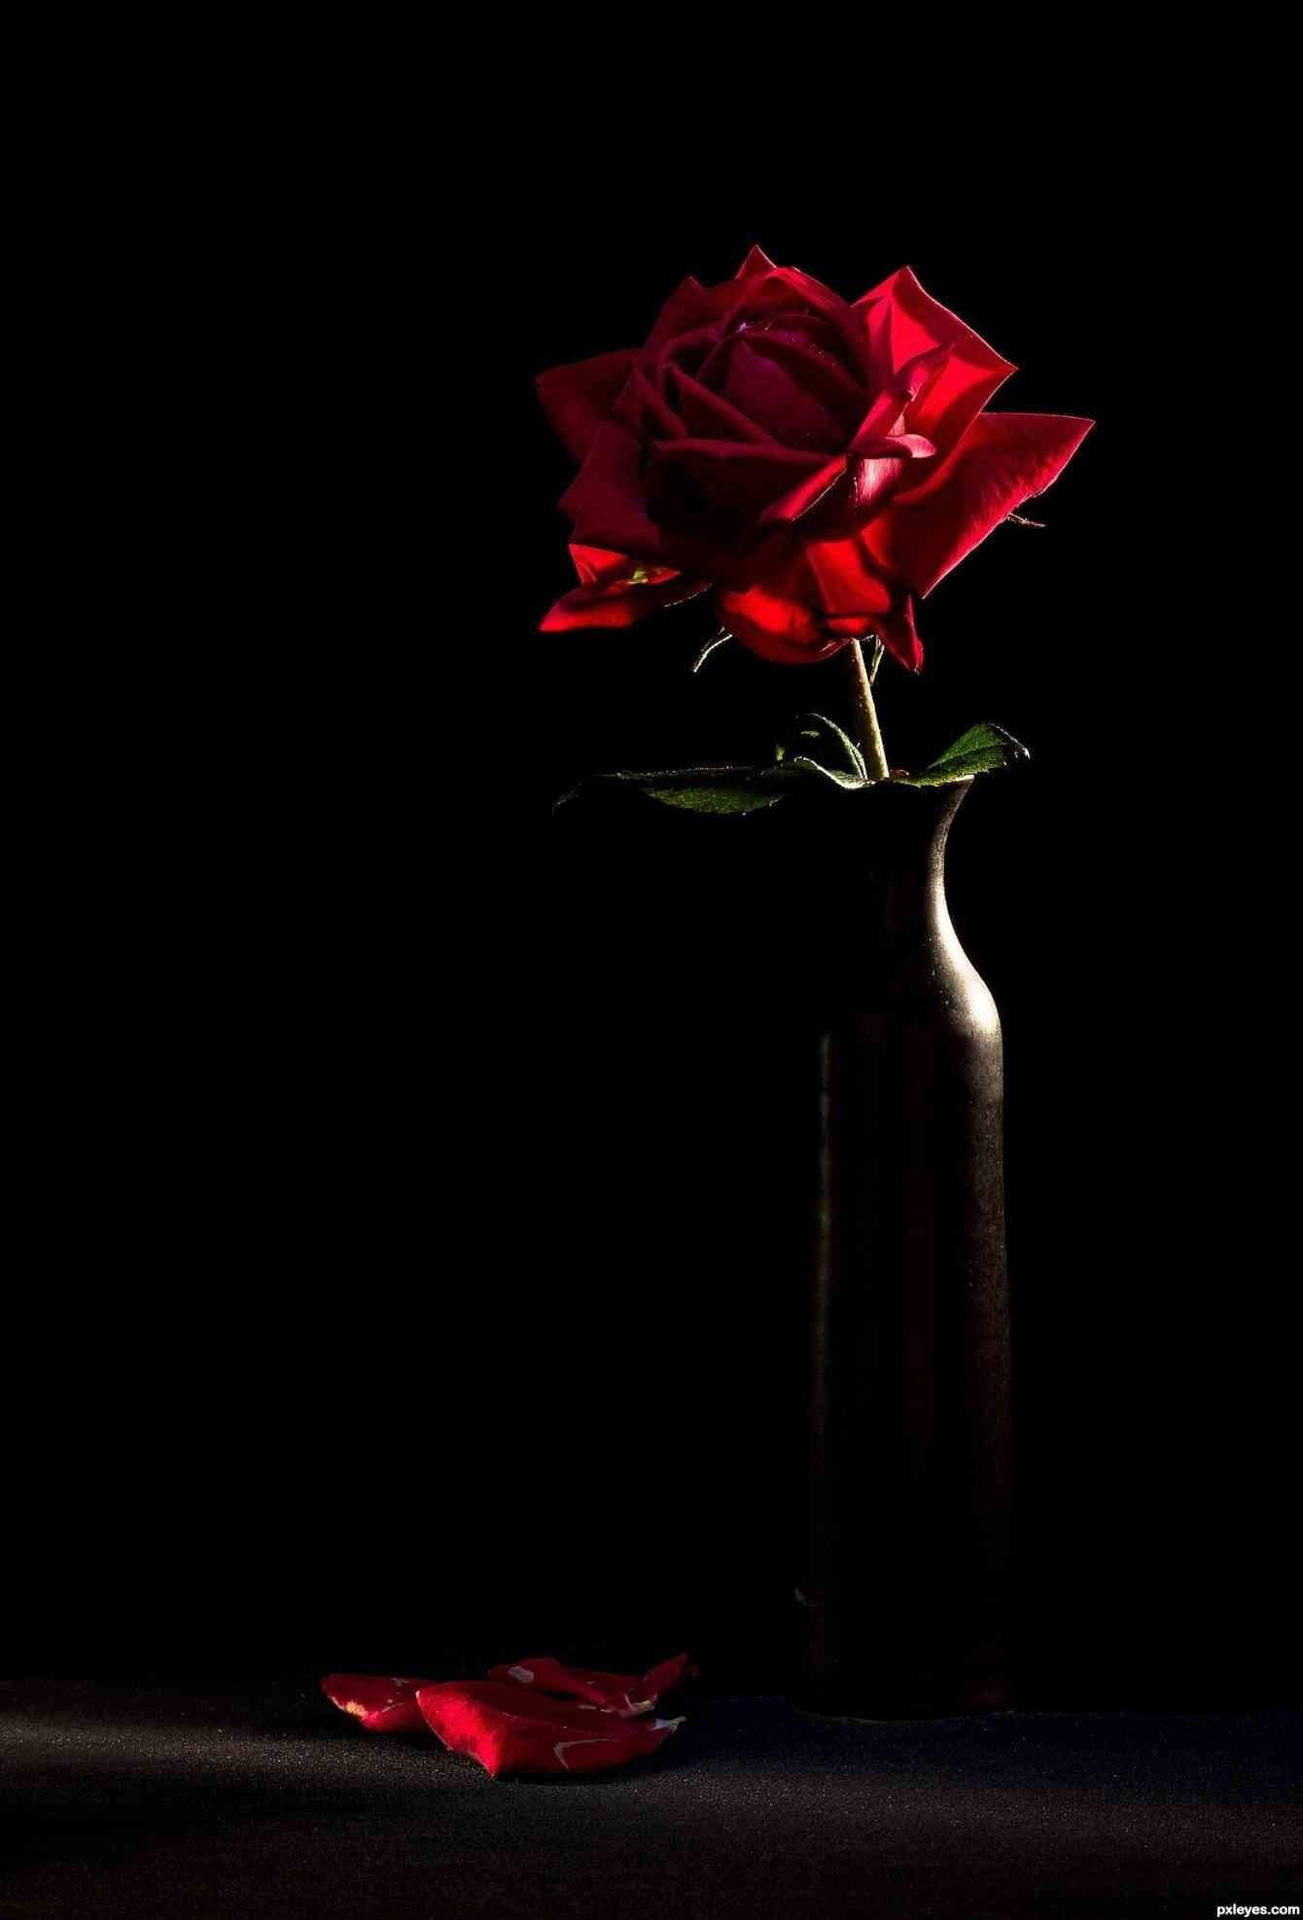 A Red Rose In A Vase On A Black Background Wallpaper